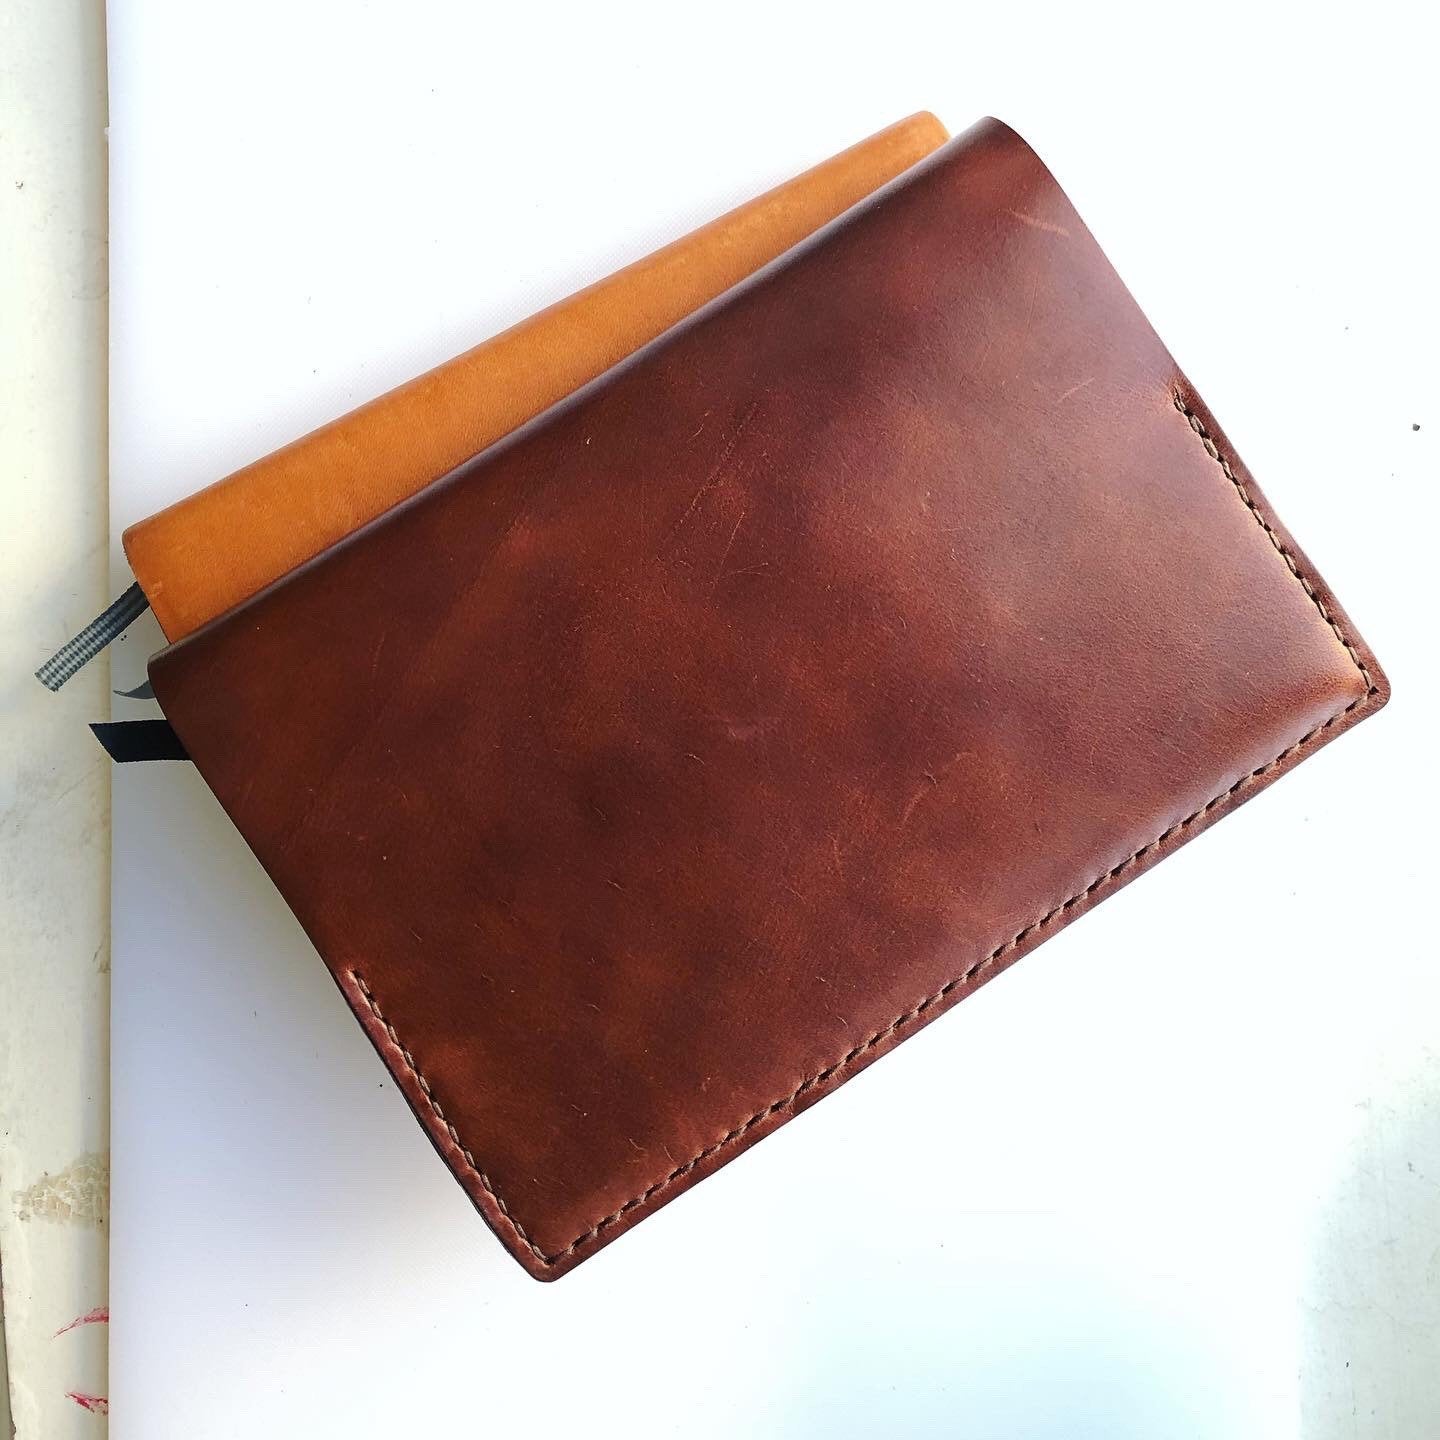 Leather Journal Cover, Moleskine Notebook Cover from Satchel & Page